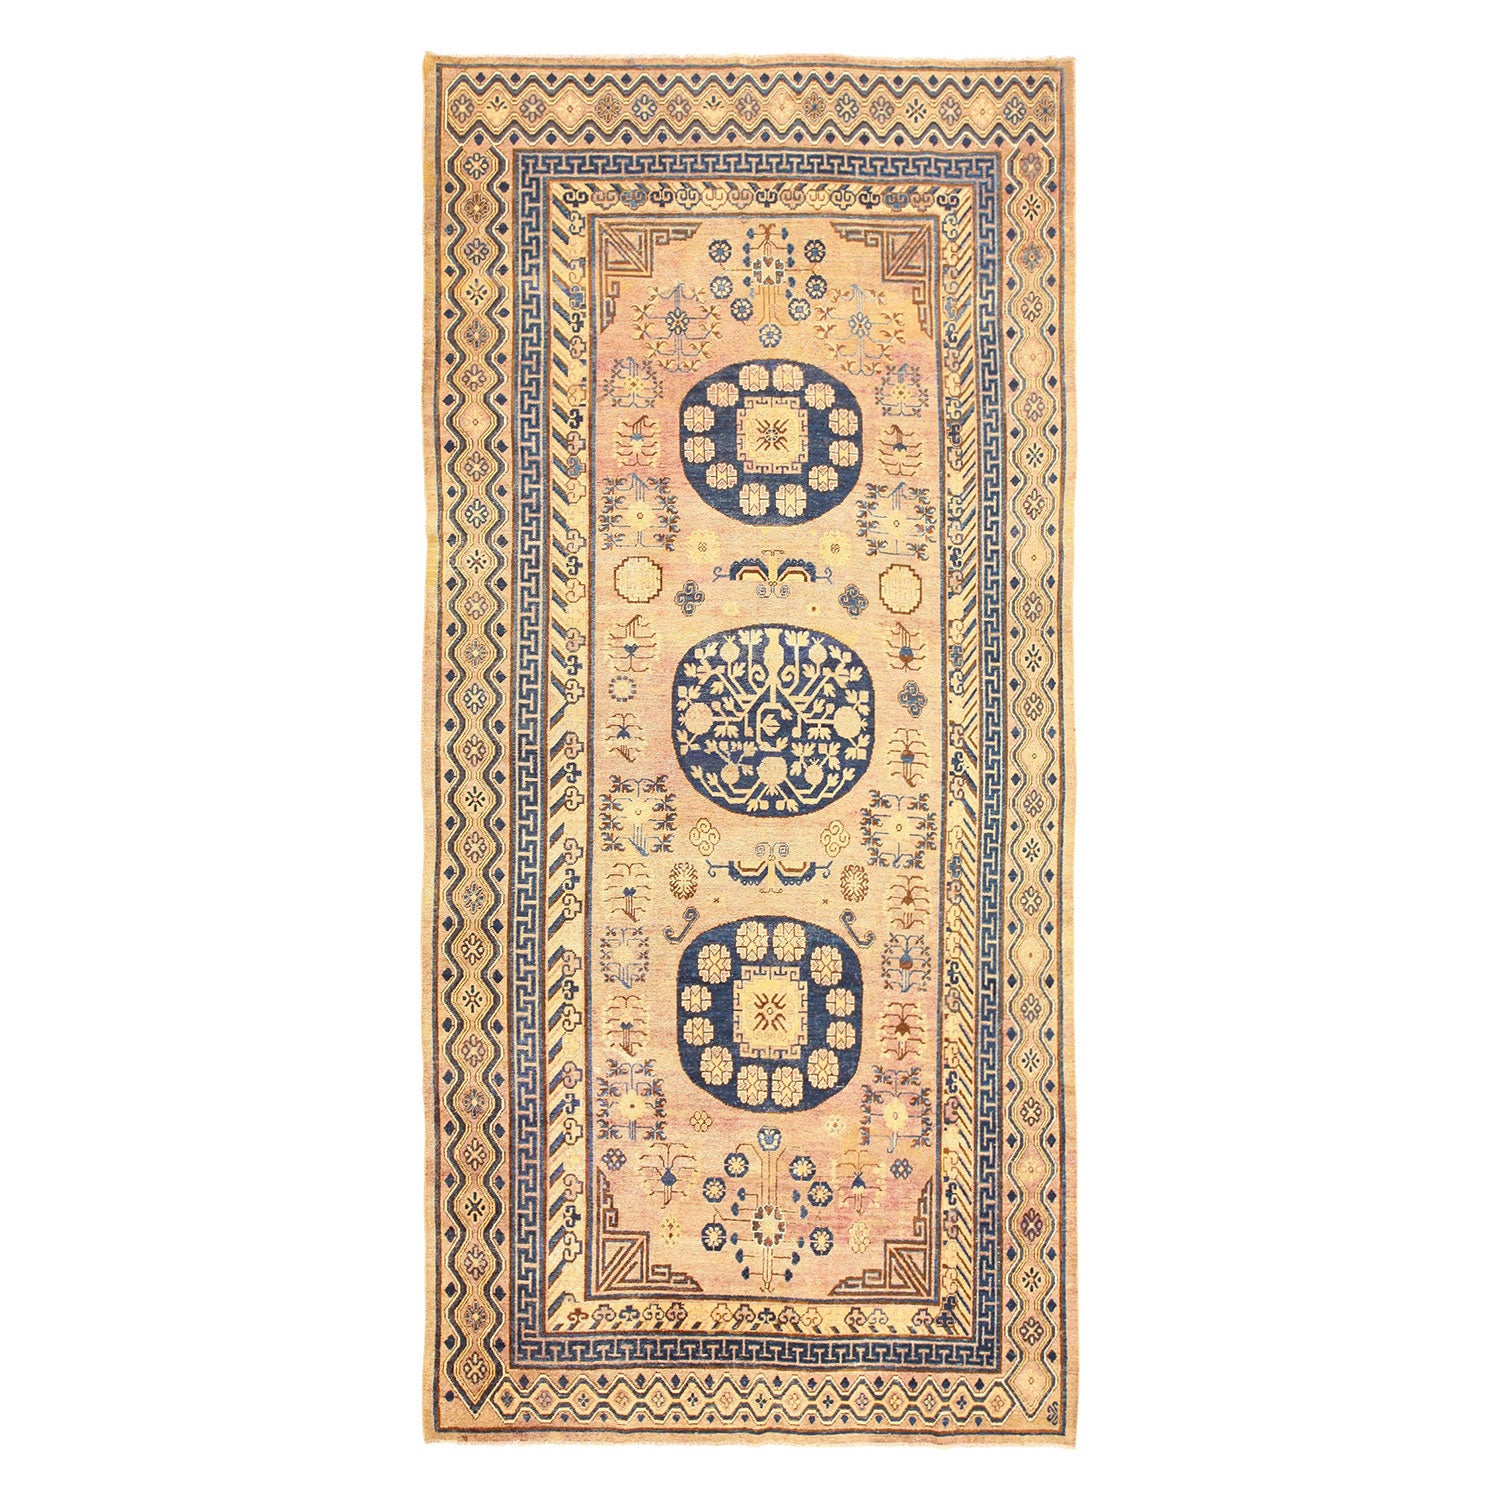 Traditional rectangular area rug with ornate patterns and symmetrical medallions.